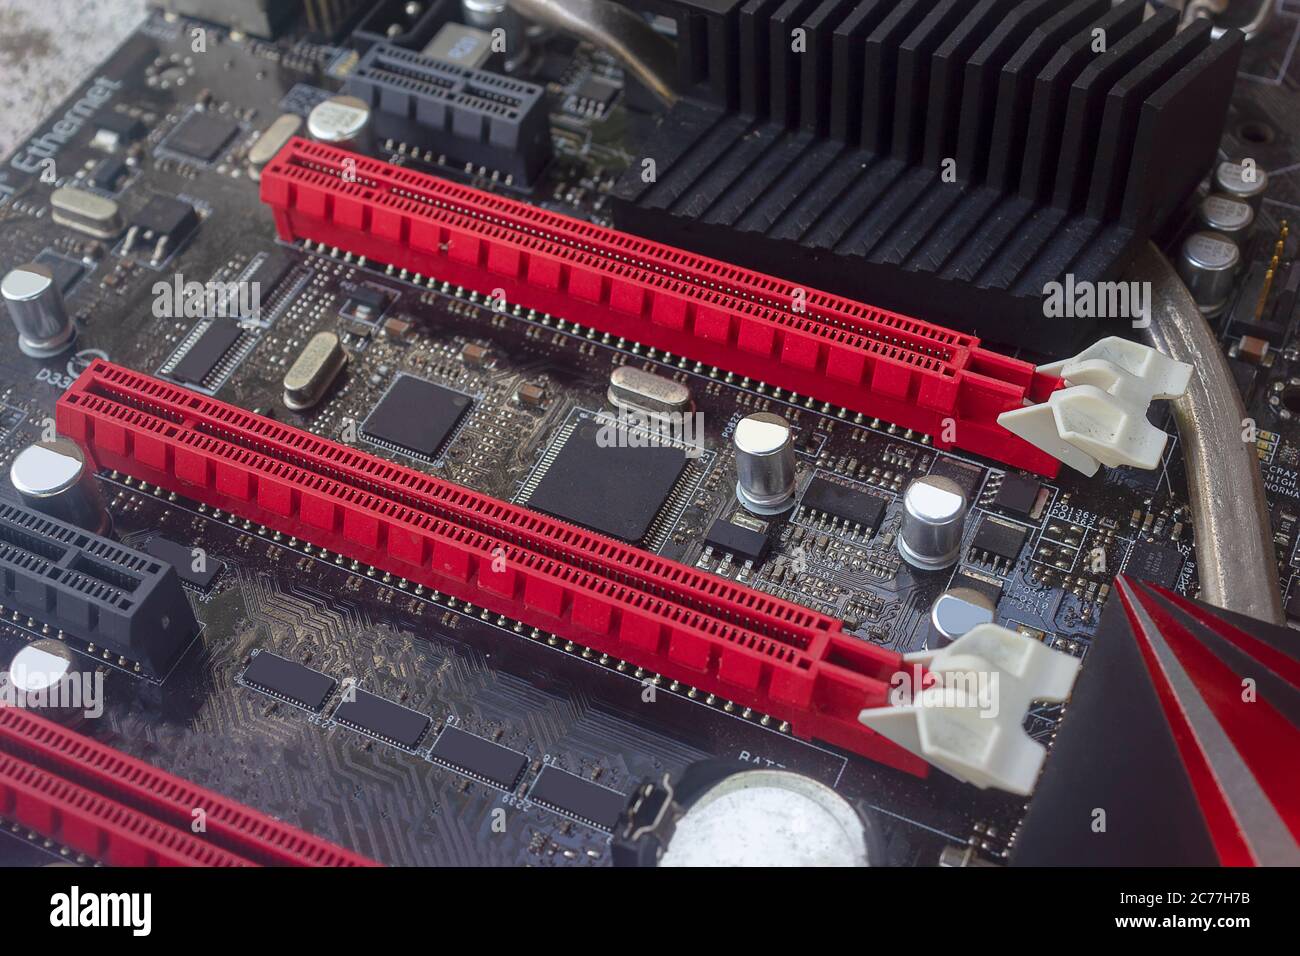 The Pci Express slot red color for video graphic card VGA card on computer motherboard Stock Photo